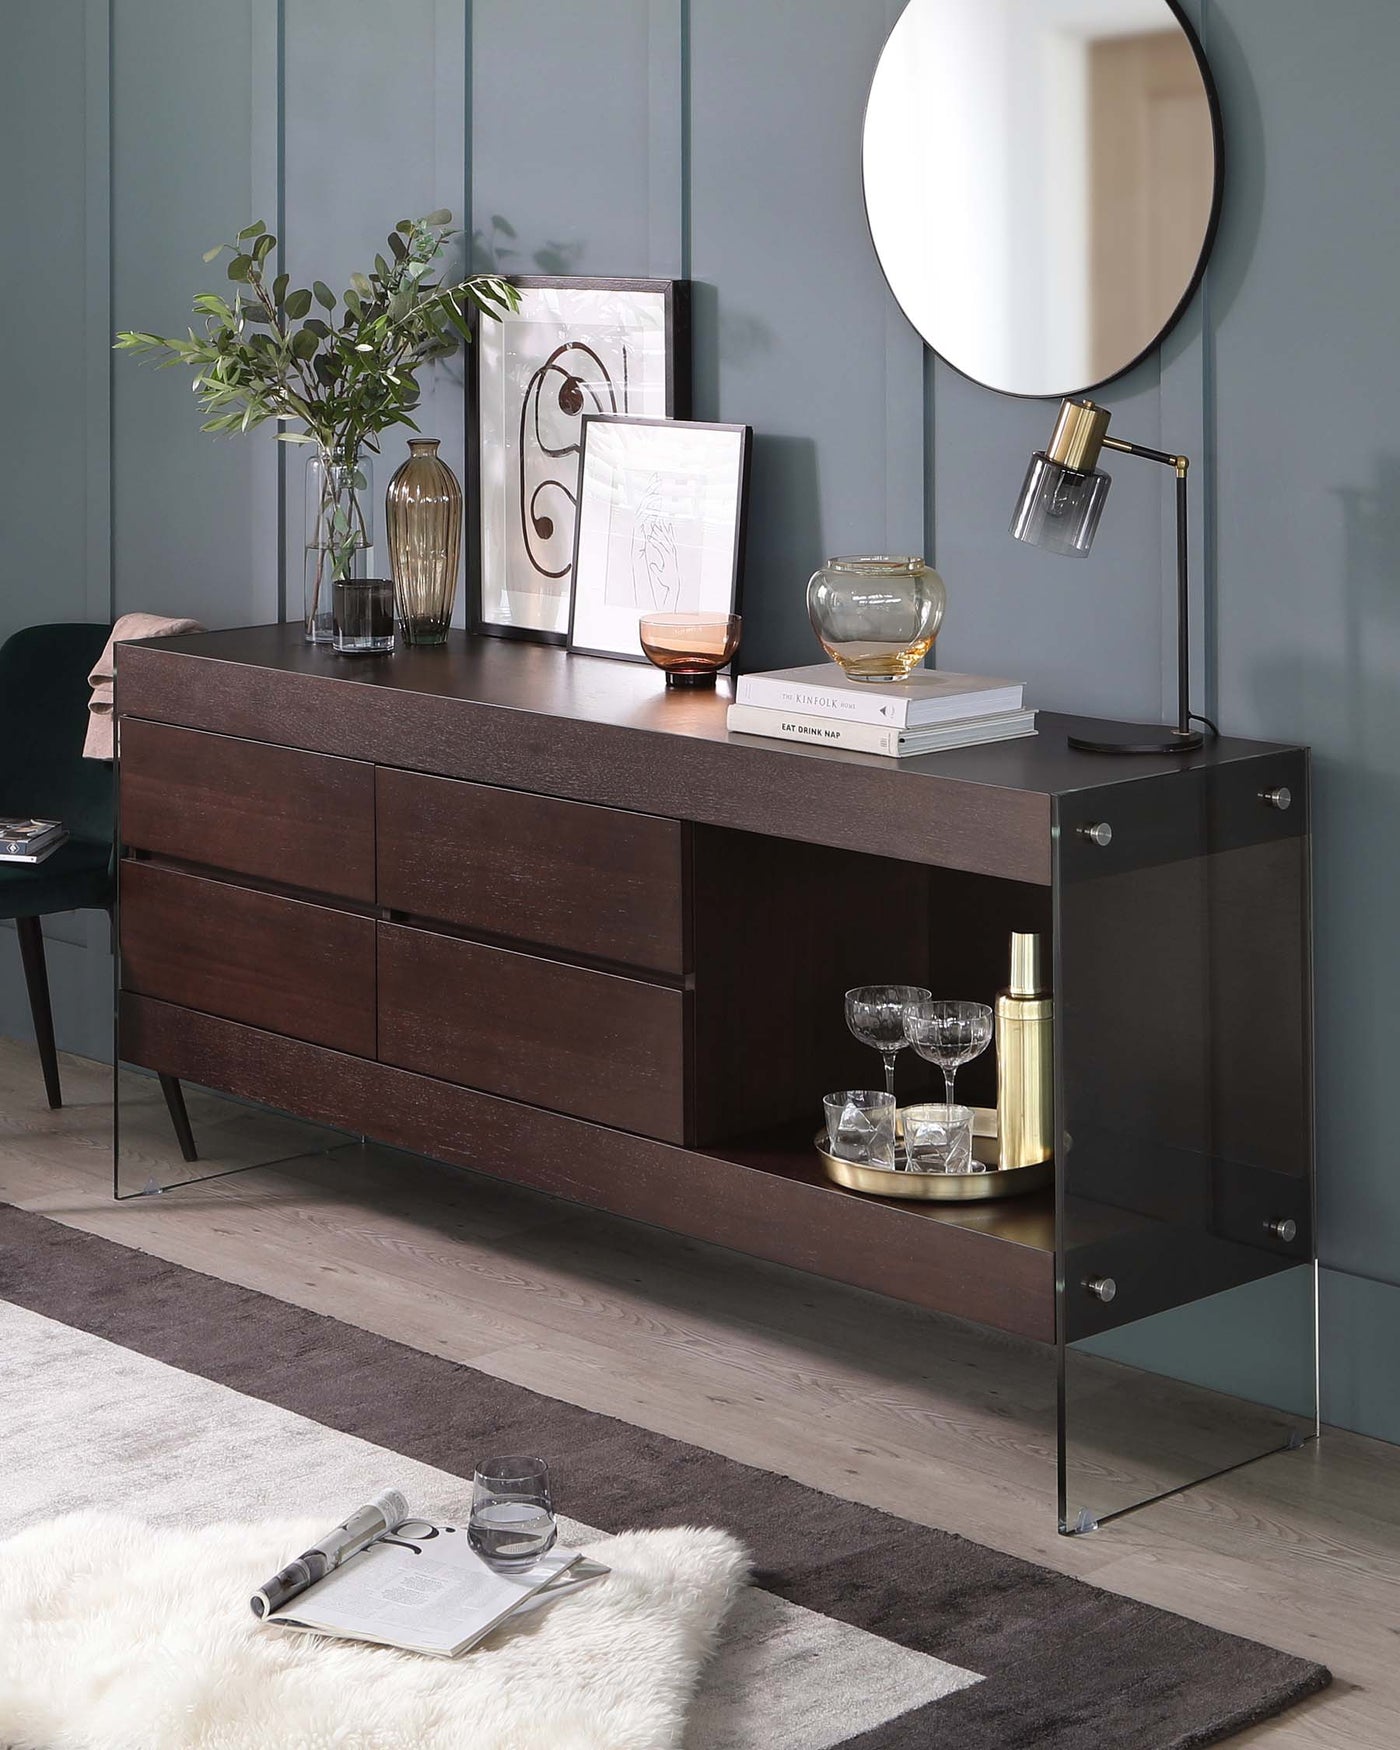 A contemporary wooden sideboard with a rich dark finish, featuring a streamlined silhouette, multiple drawers, and an open shelf with a contrasting gold-tone circular base. The sideboard is supported by a minimalist metal frame with a glass end panel accentuating its modern design.